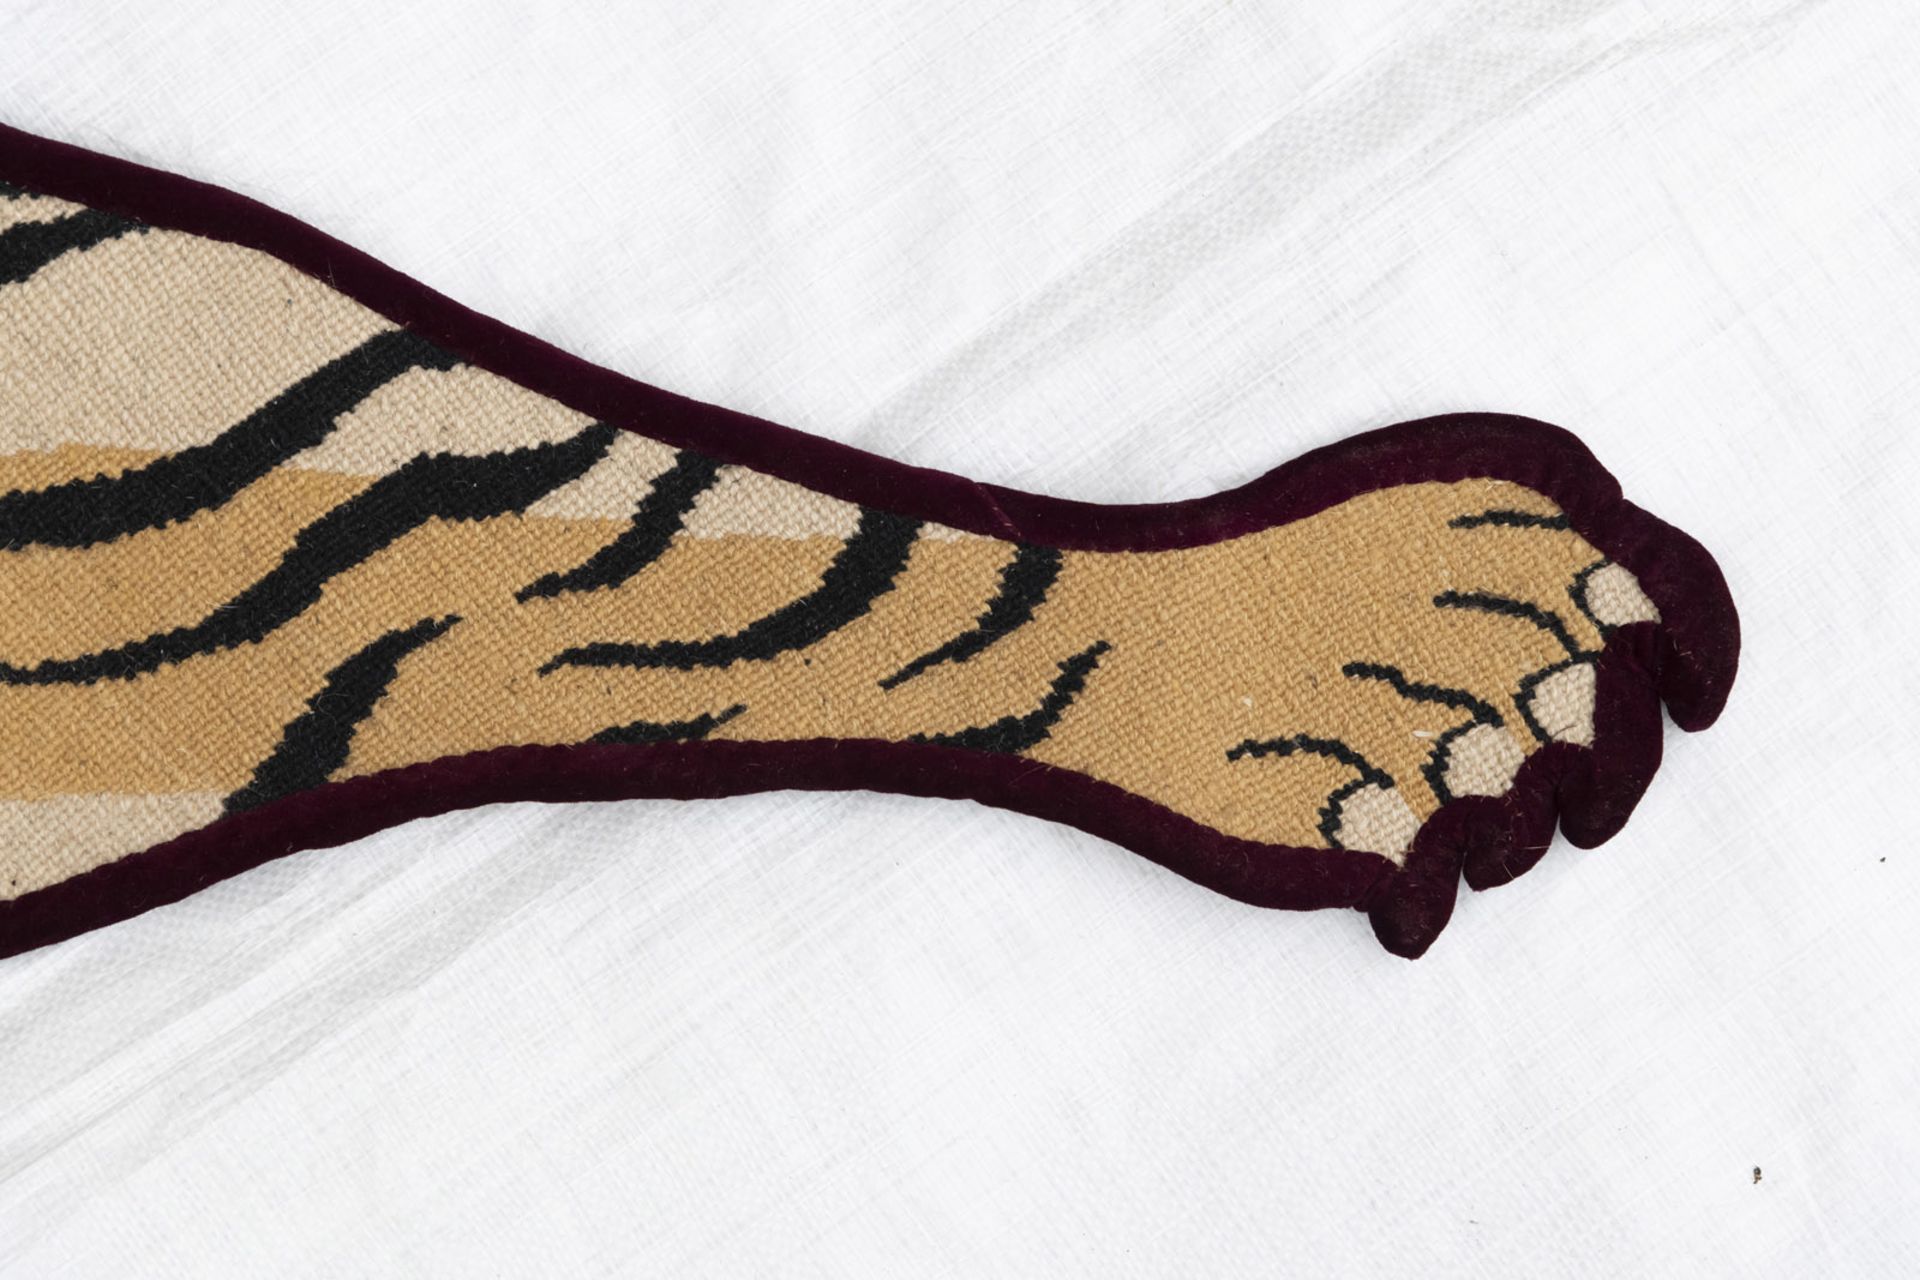 A WOOL RUG KNOTTED IN THE SHAPE OF A TIGER PELT - Image 3 of 6